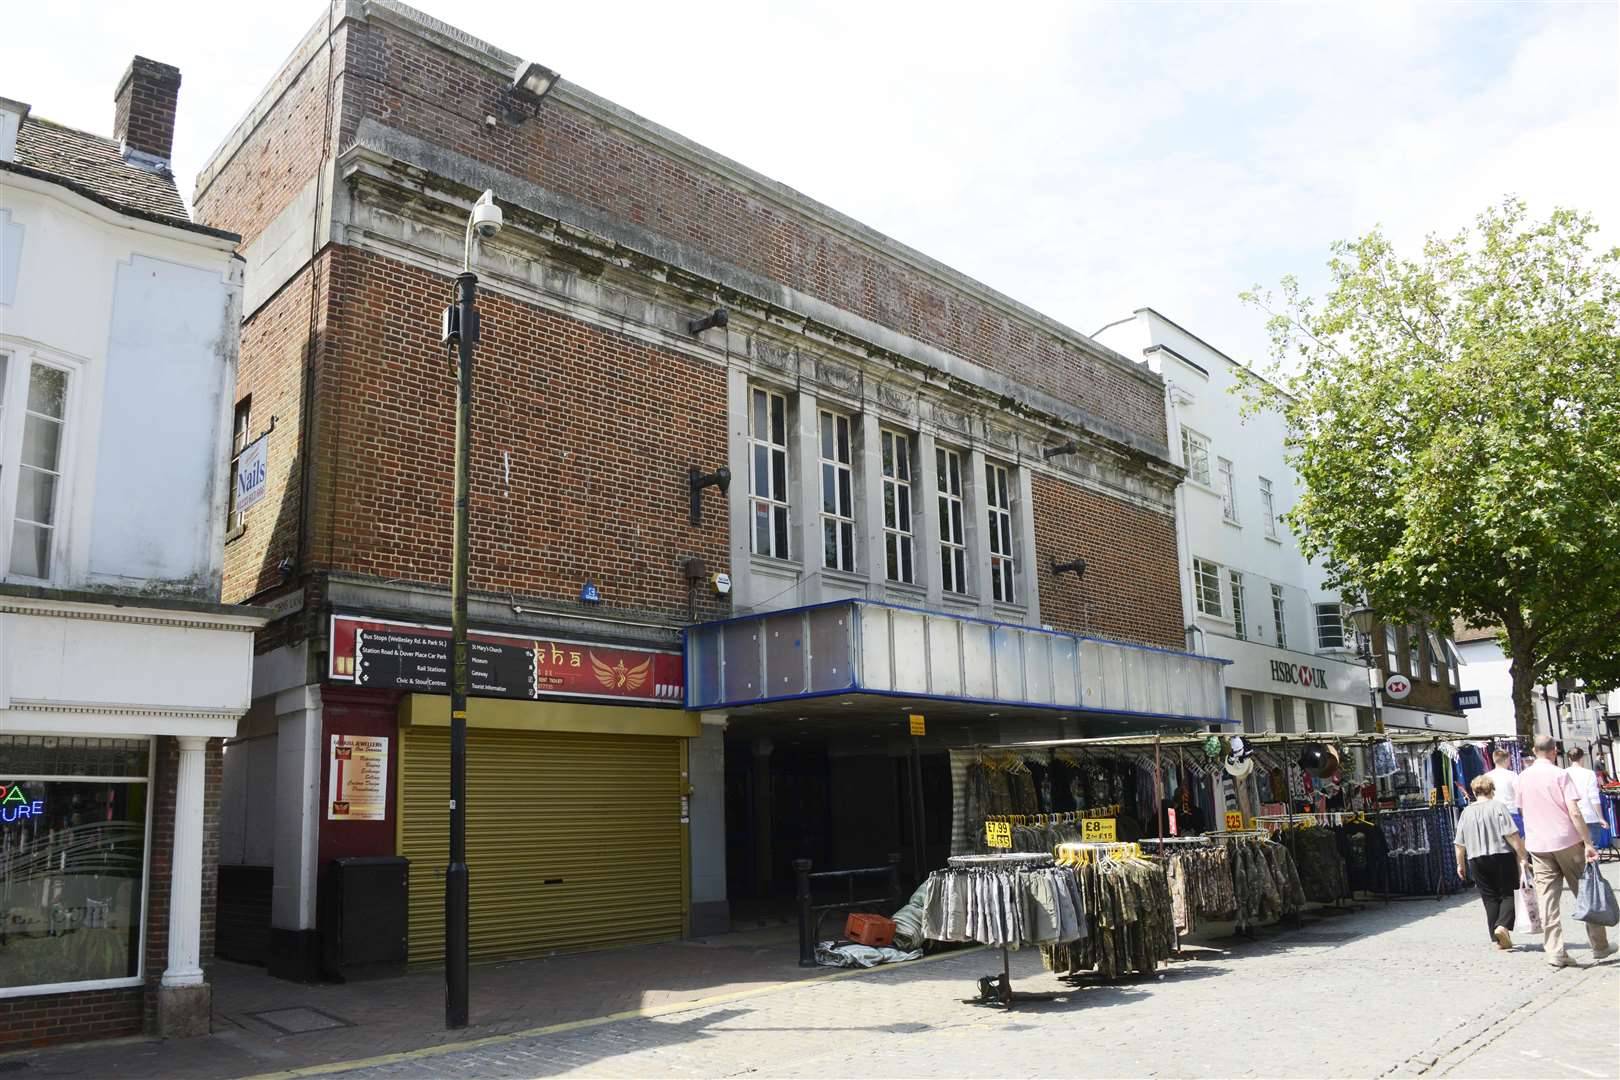 The former Mecca Bingo building frontage is to be retained, but the entrance will be knocked through